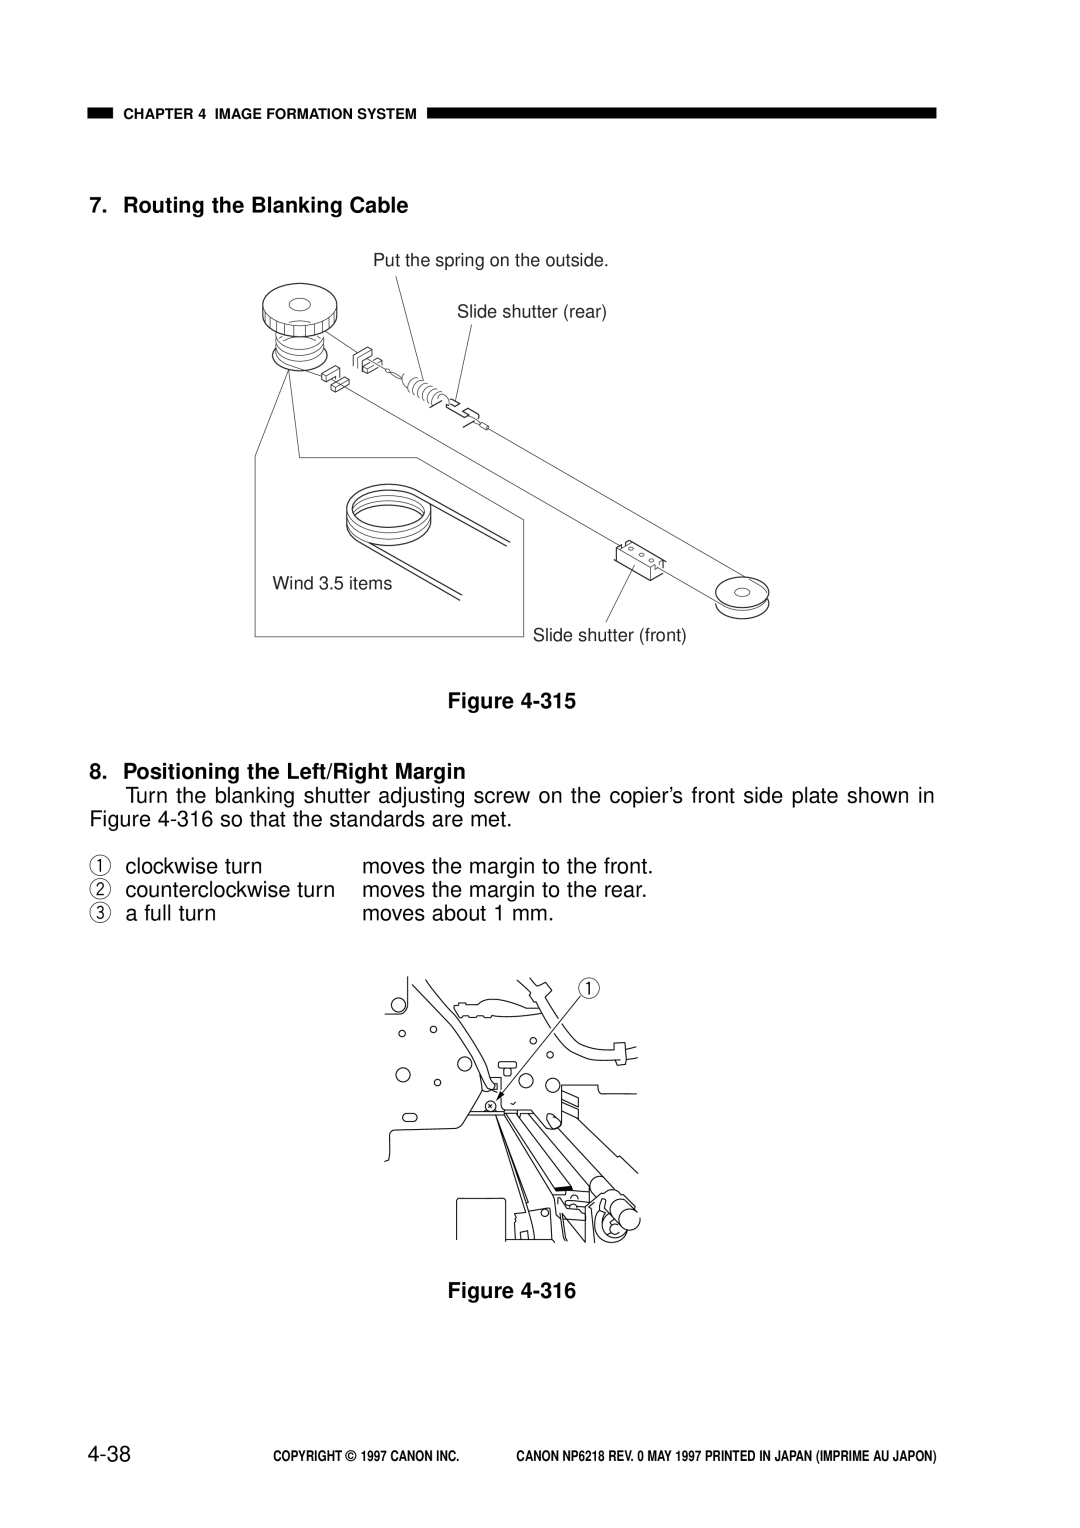 Canon NP6218, FY8-13EX-000 service manual Routing the Blanking Cable, Positioning the Left/Right Margin, 4-38 